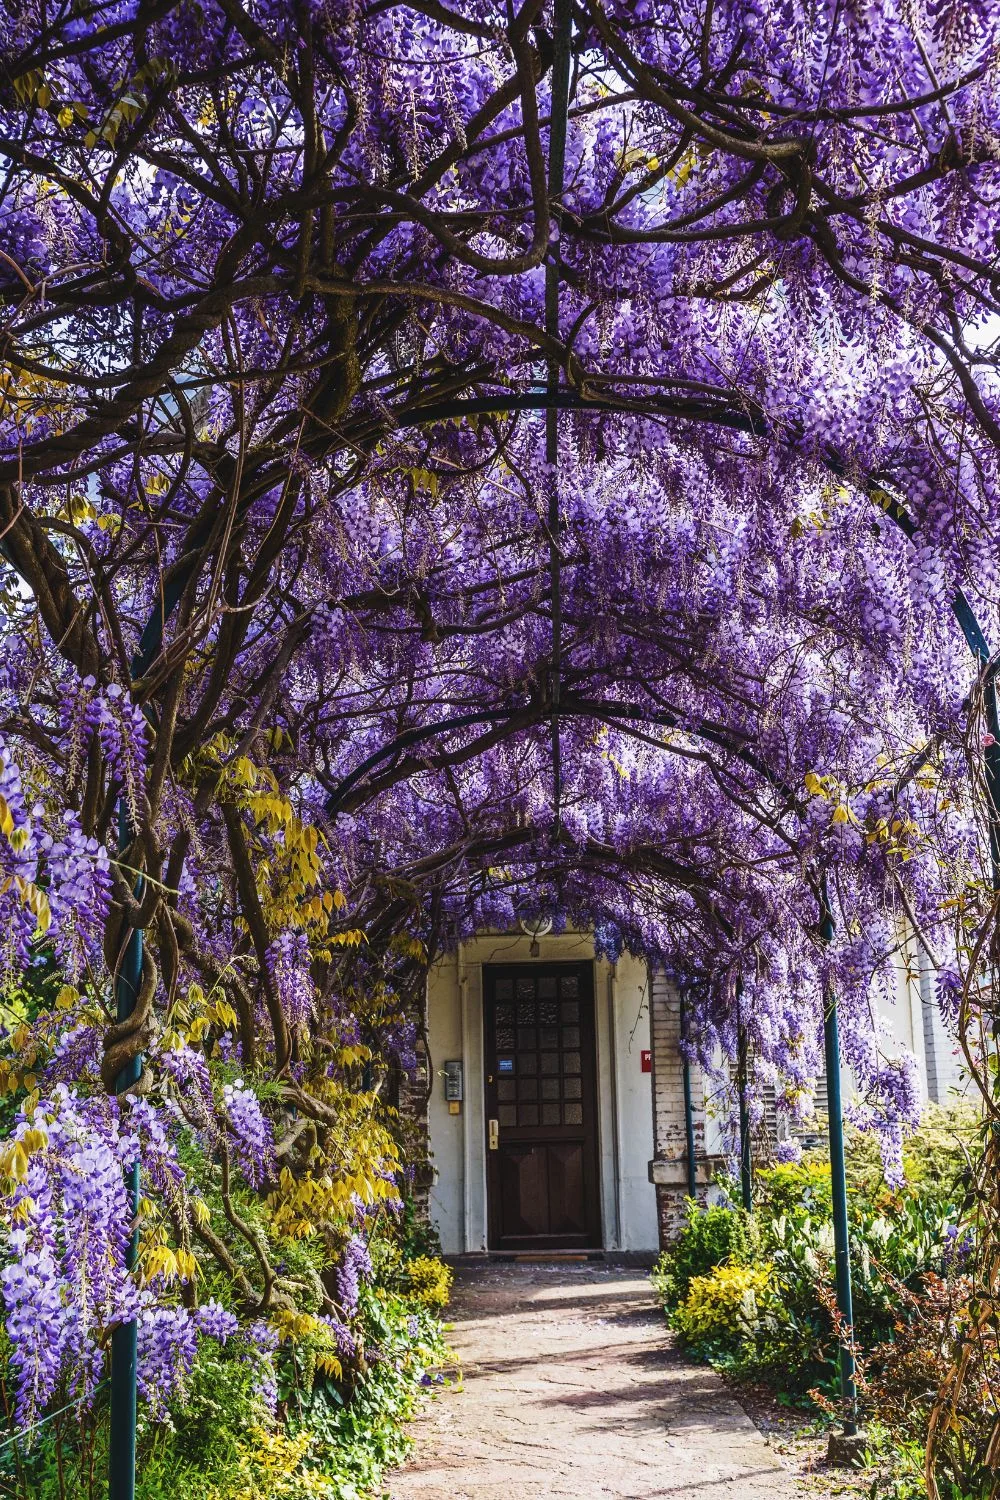 Metal arbor covered in gorgeous wisteria flowers.